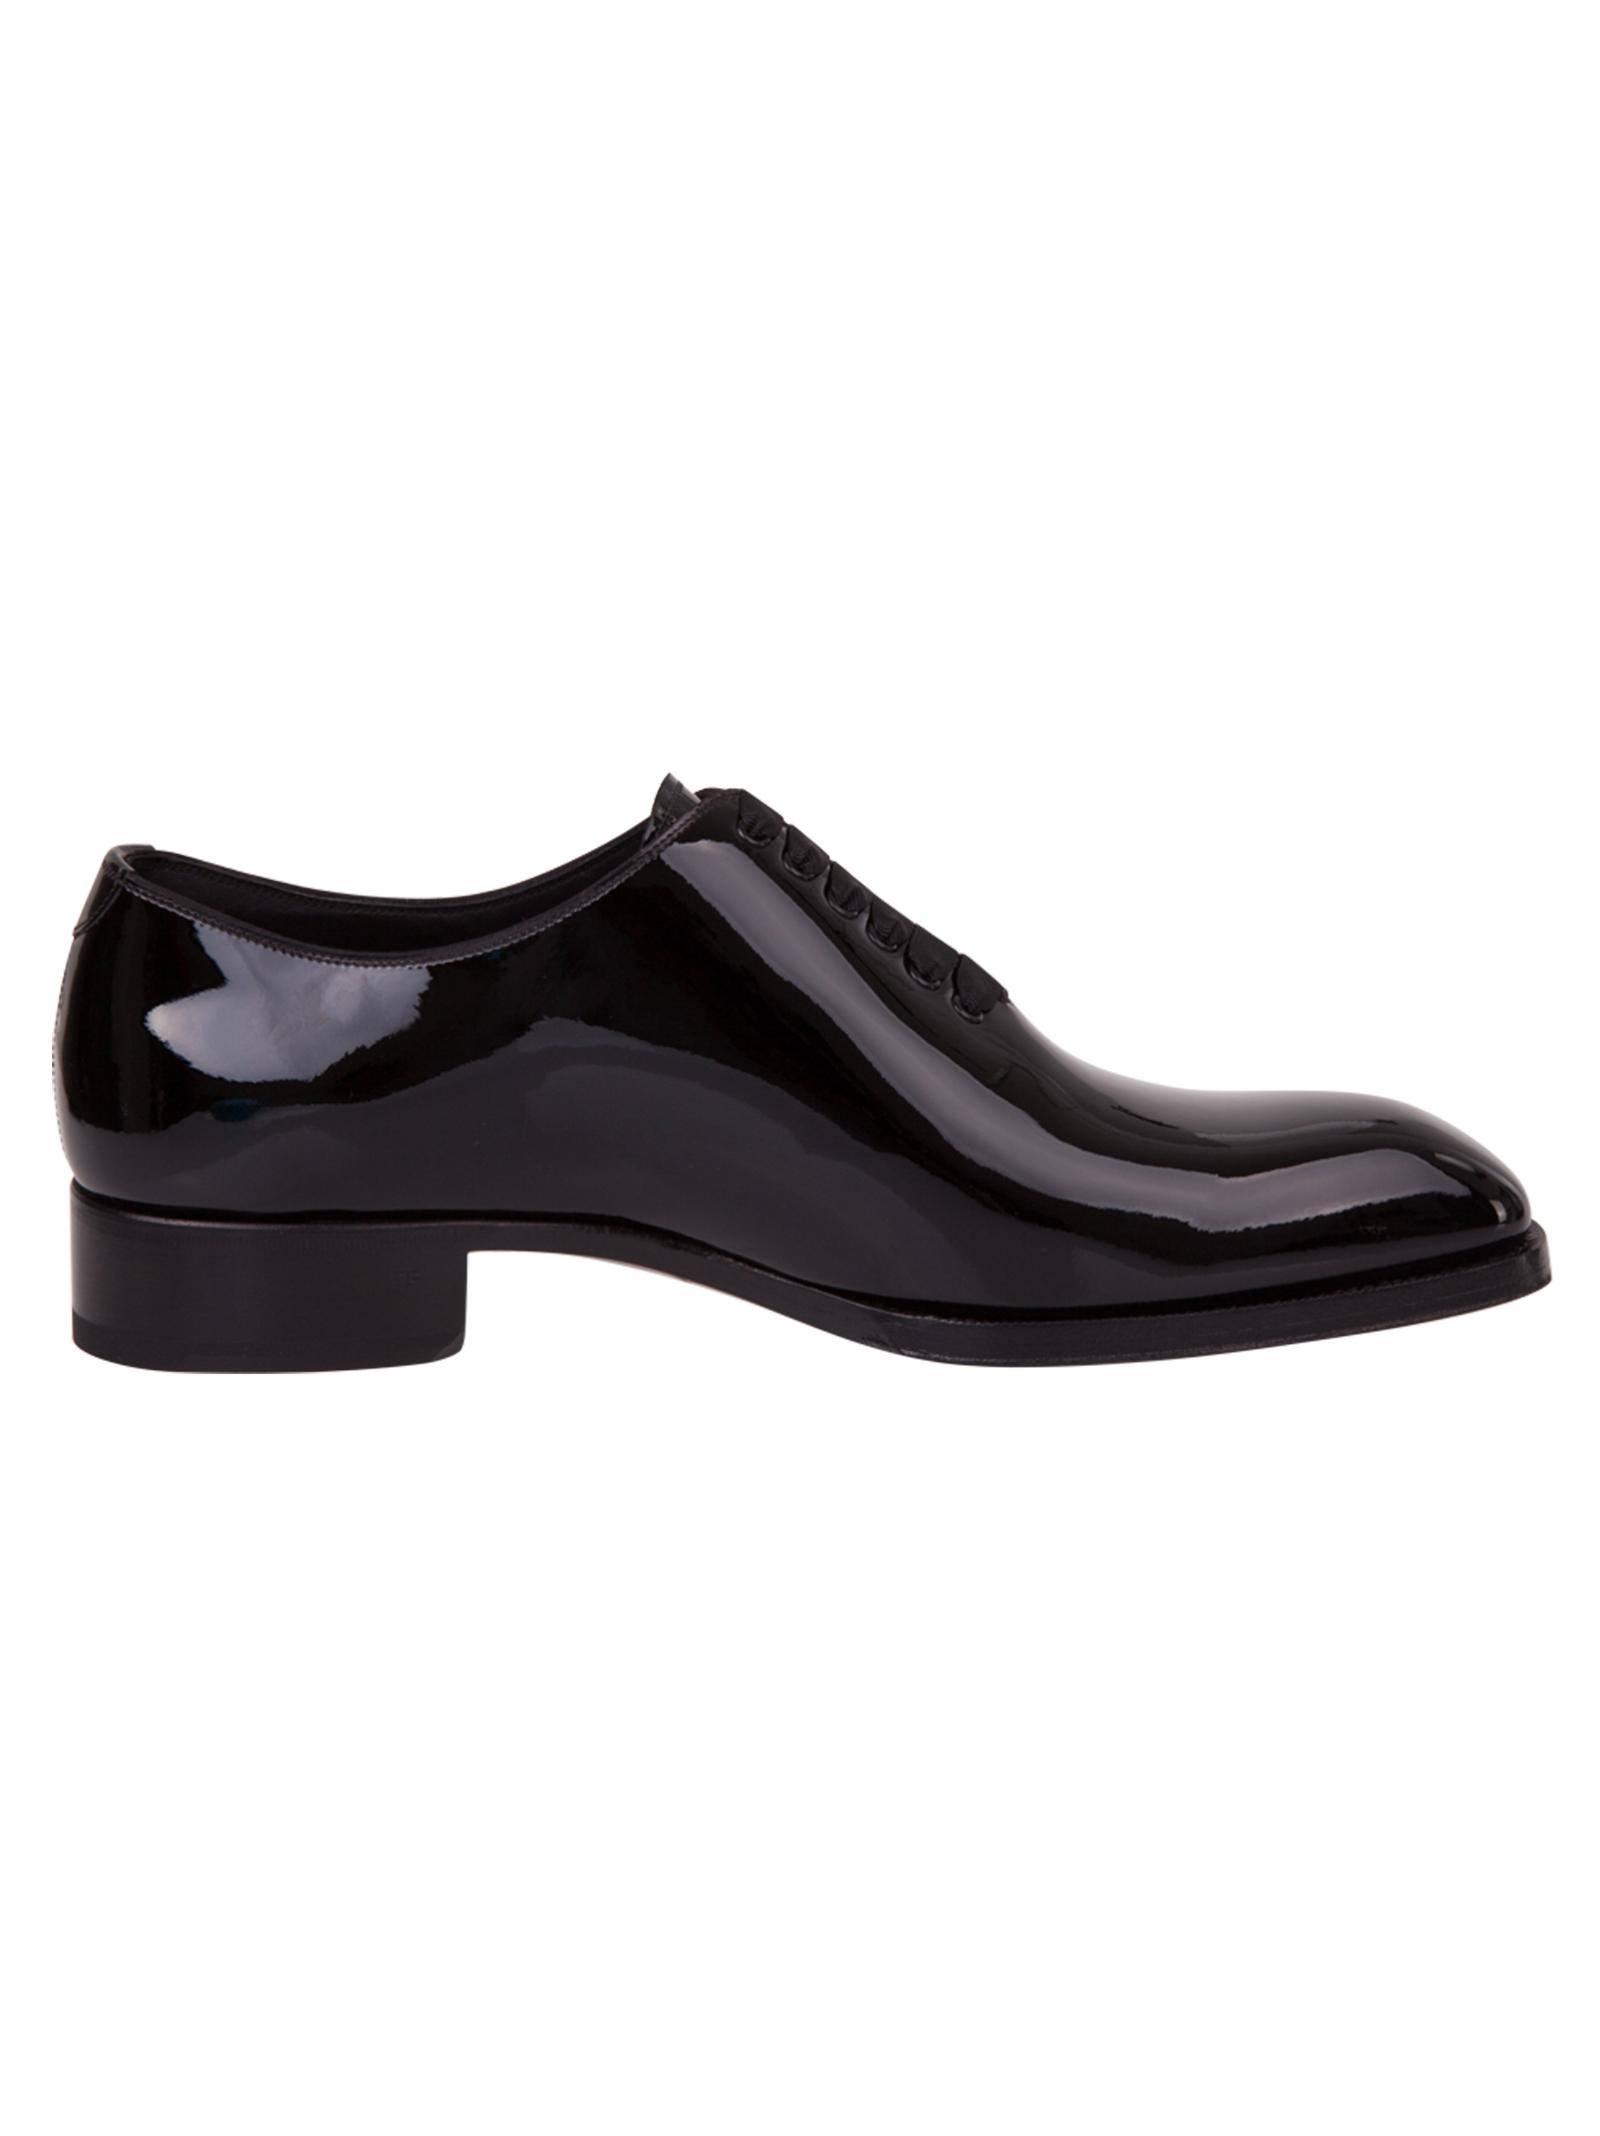 Tom Ford Oxford Model Black Shoes In Shiny Patent Leather With Gros ...